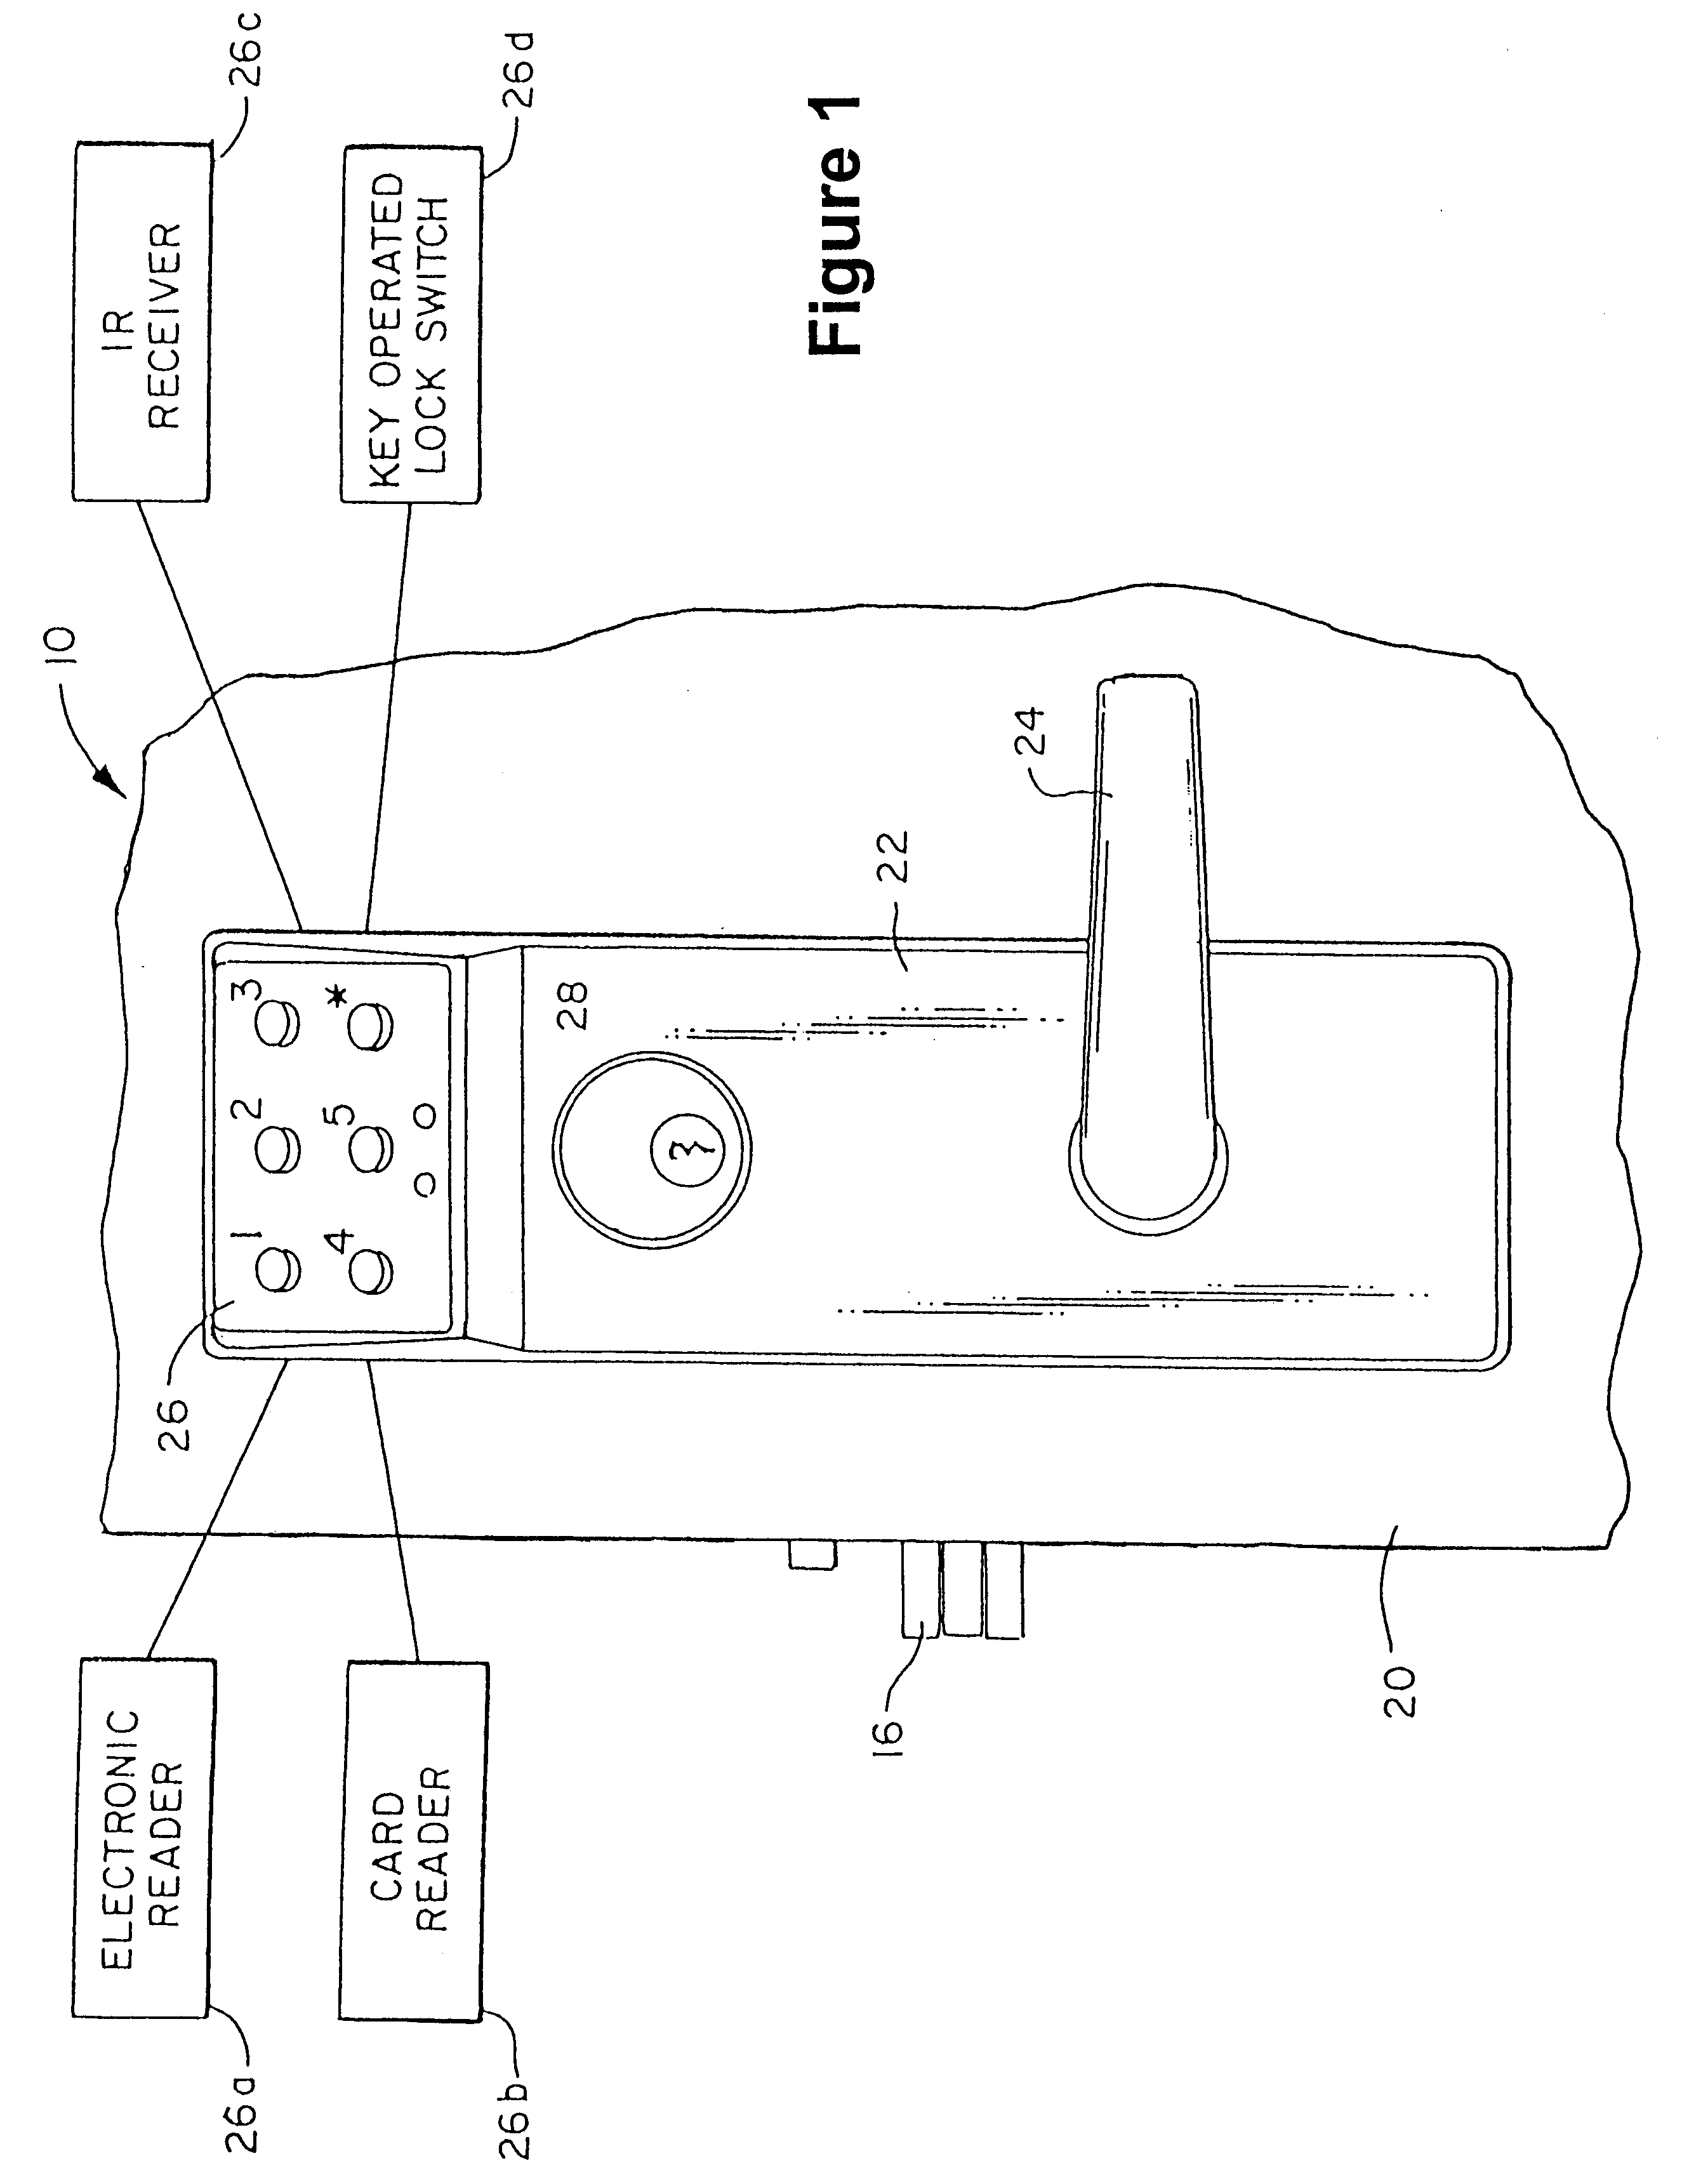 Clutch mechanism with moveable injector retainer wall for door lock system